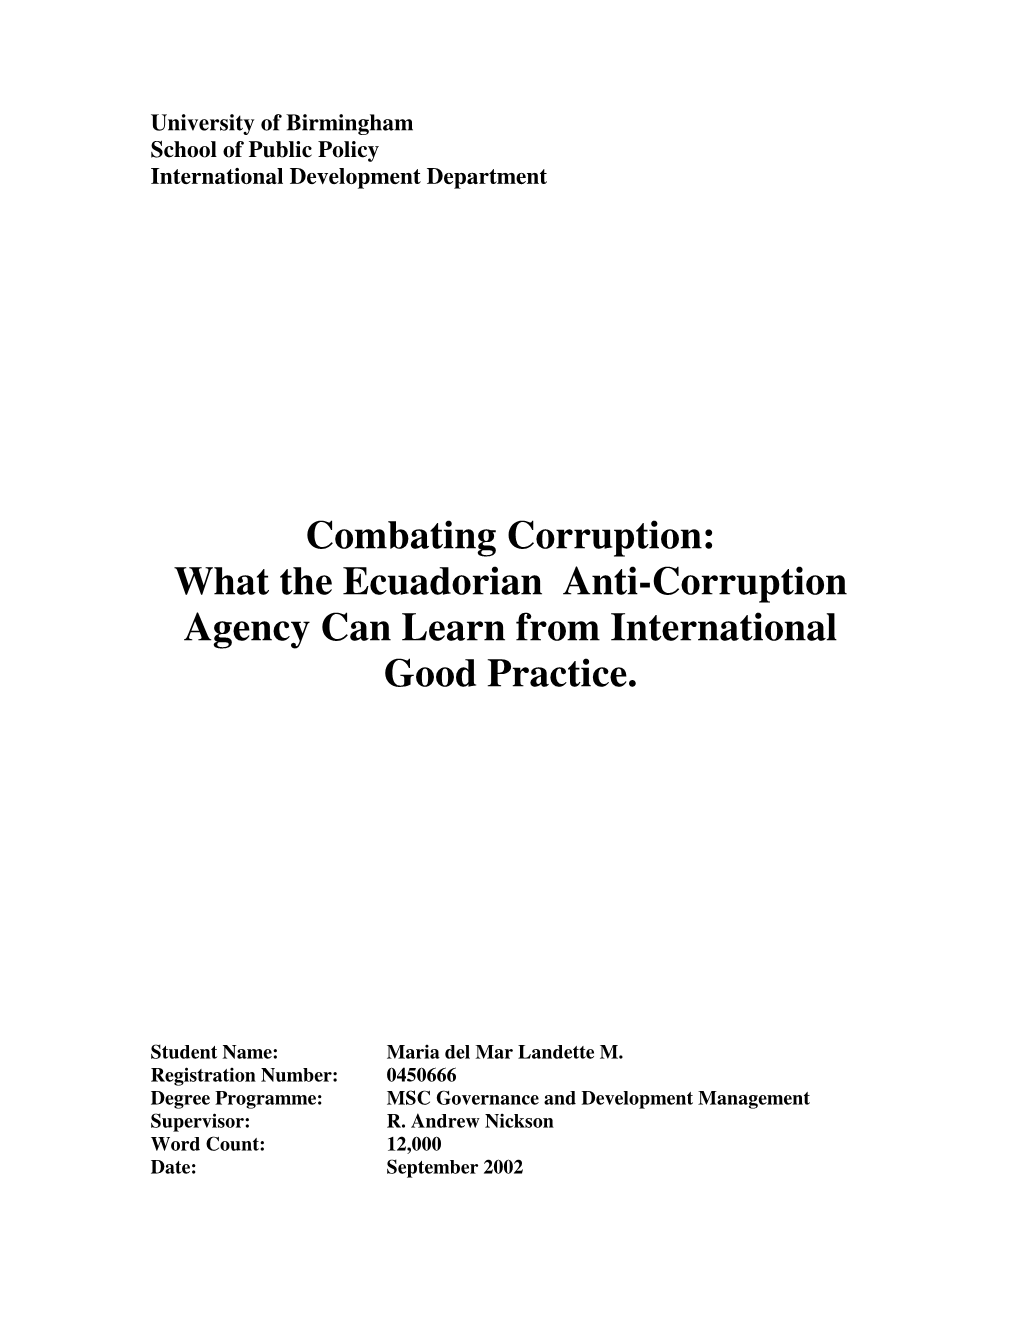 Combating Corruption: What the Ecuadorian Anti-Corruption Agency Can Learn from International Good Practice